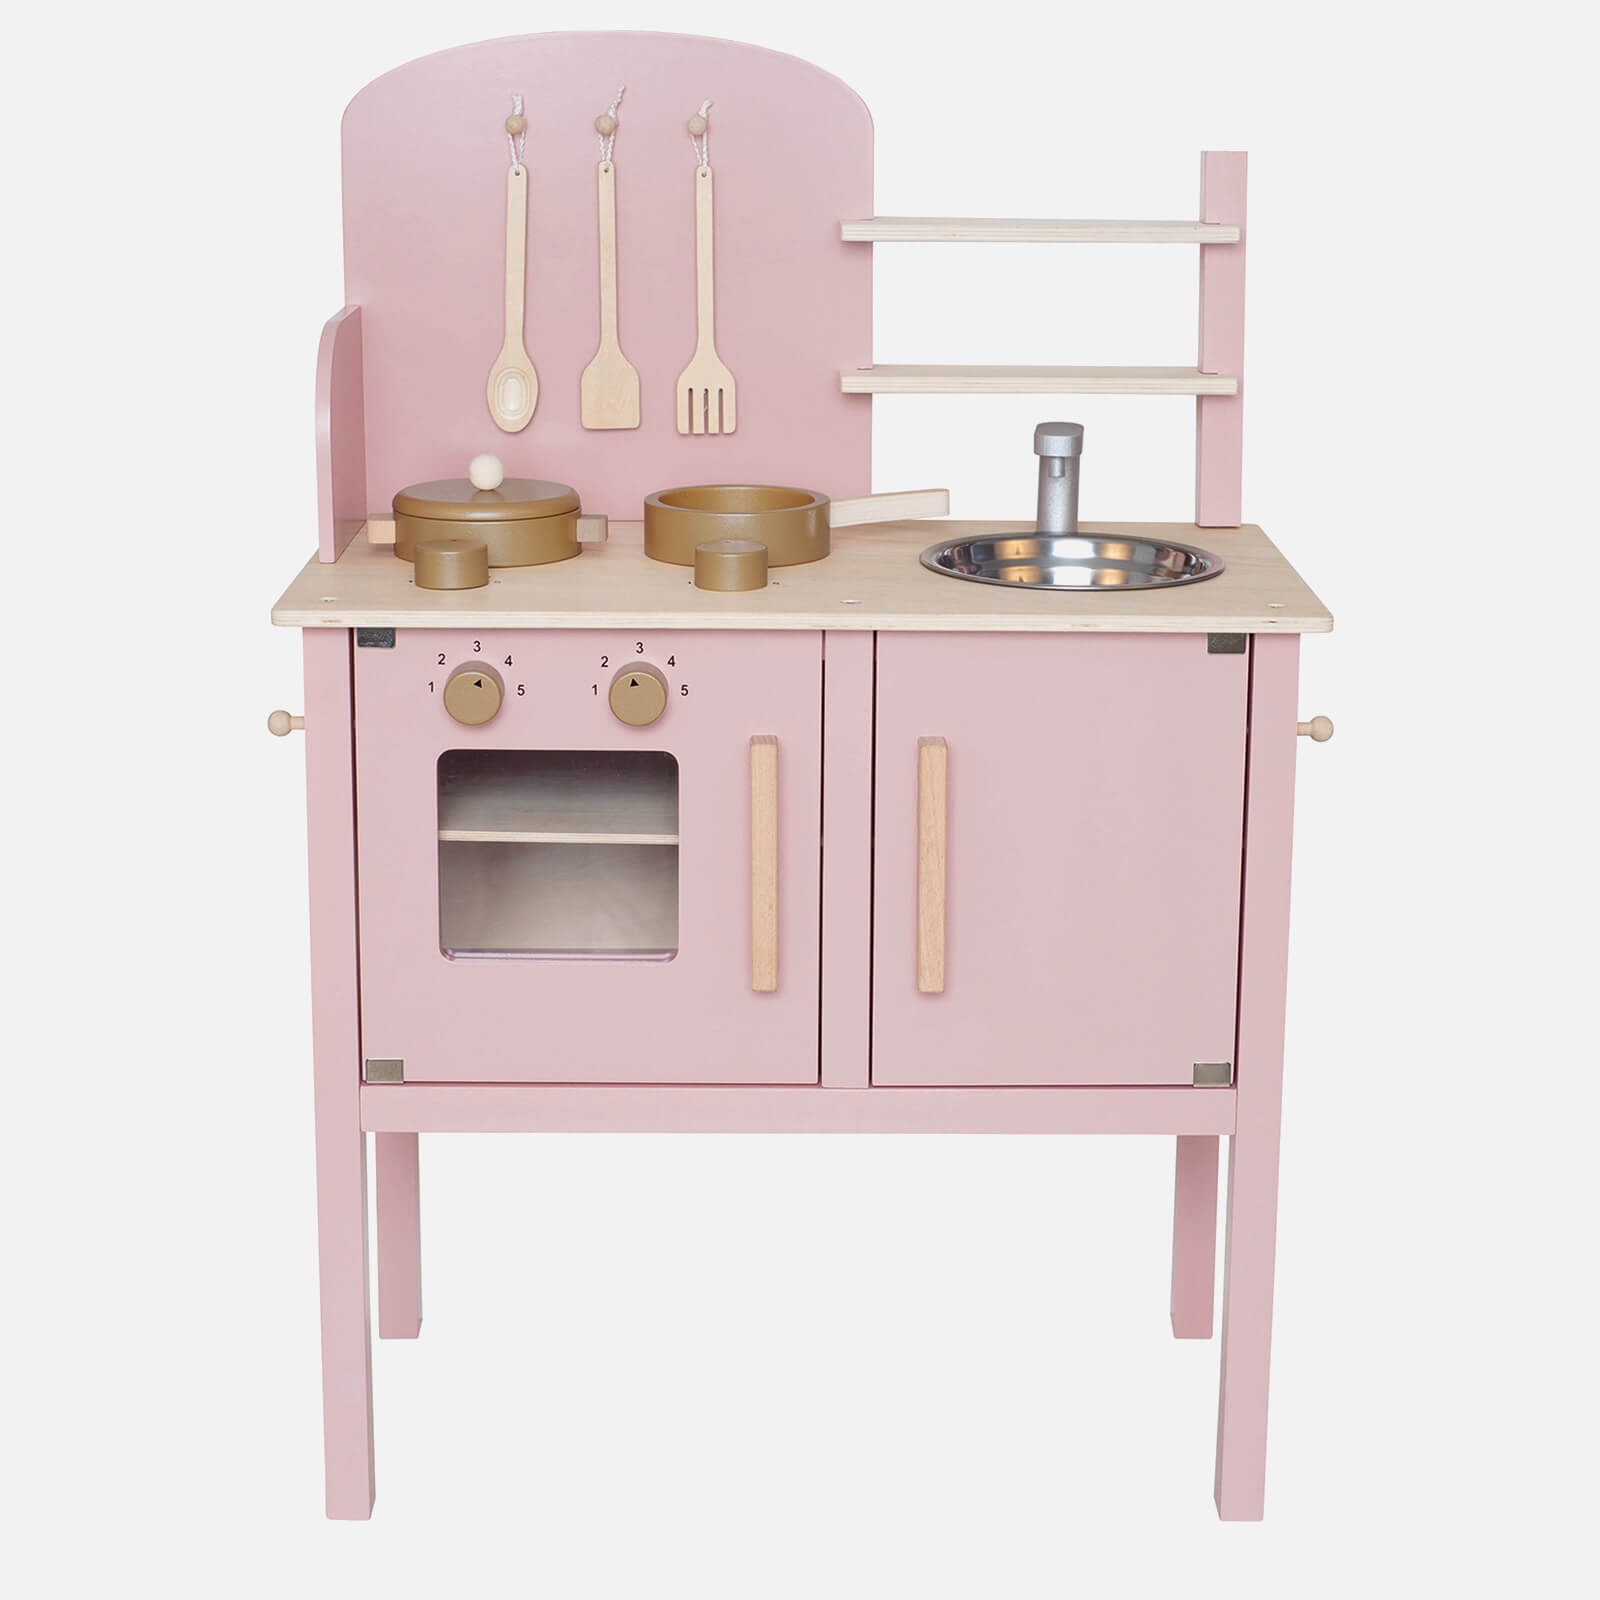 Toy Kitchens & Play Food